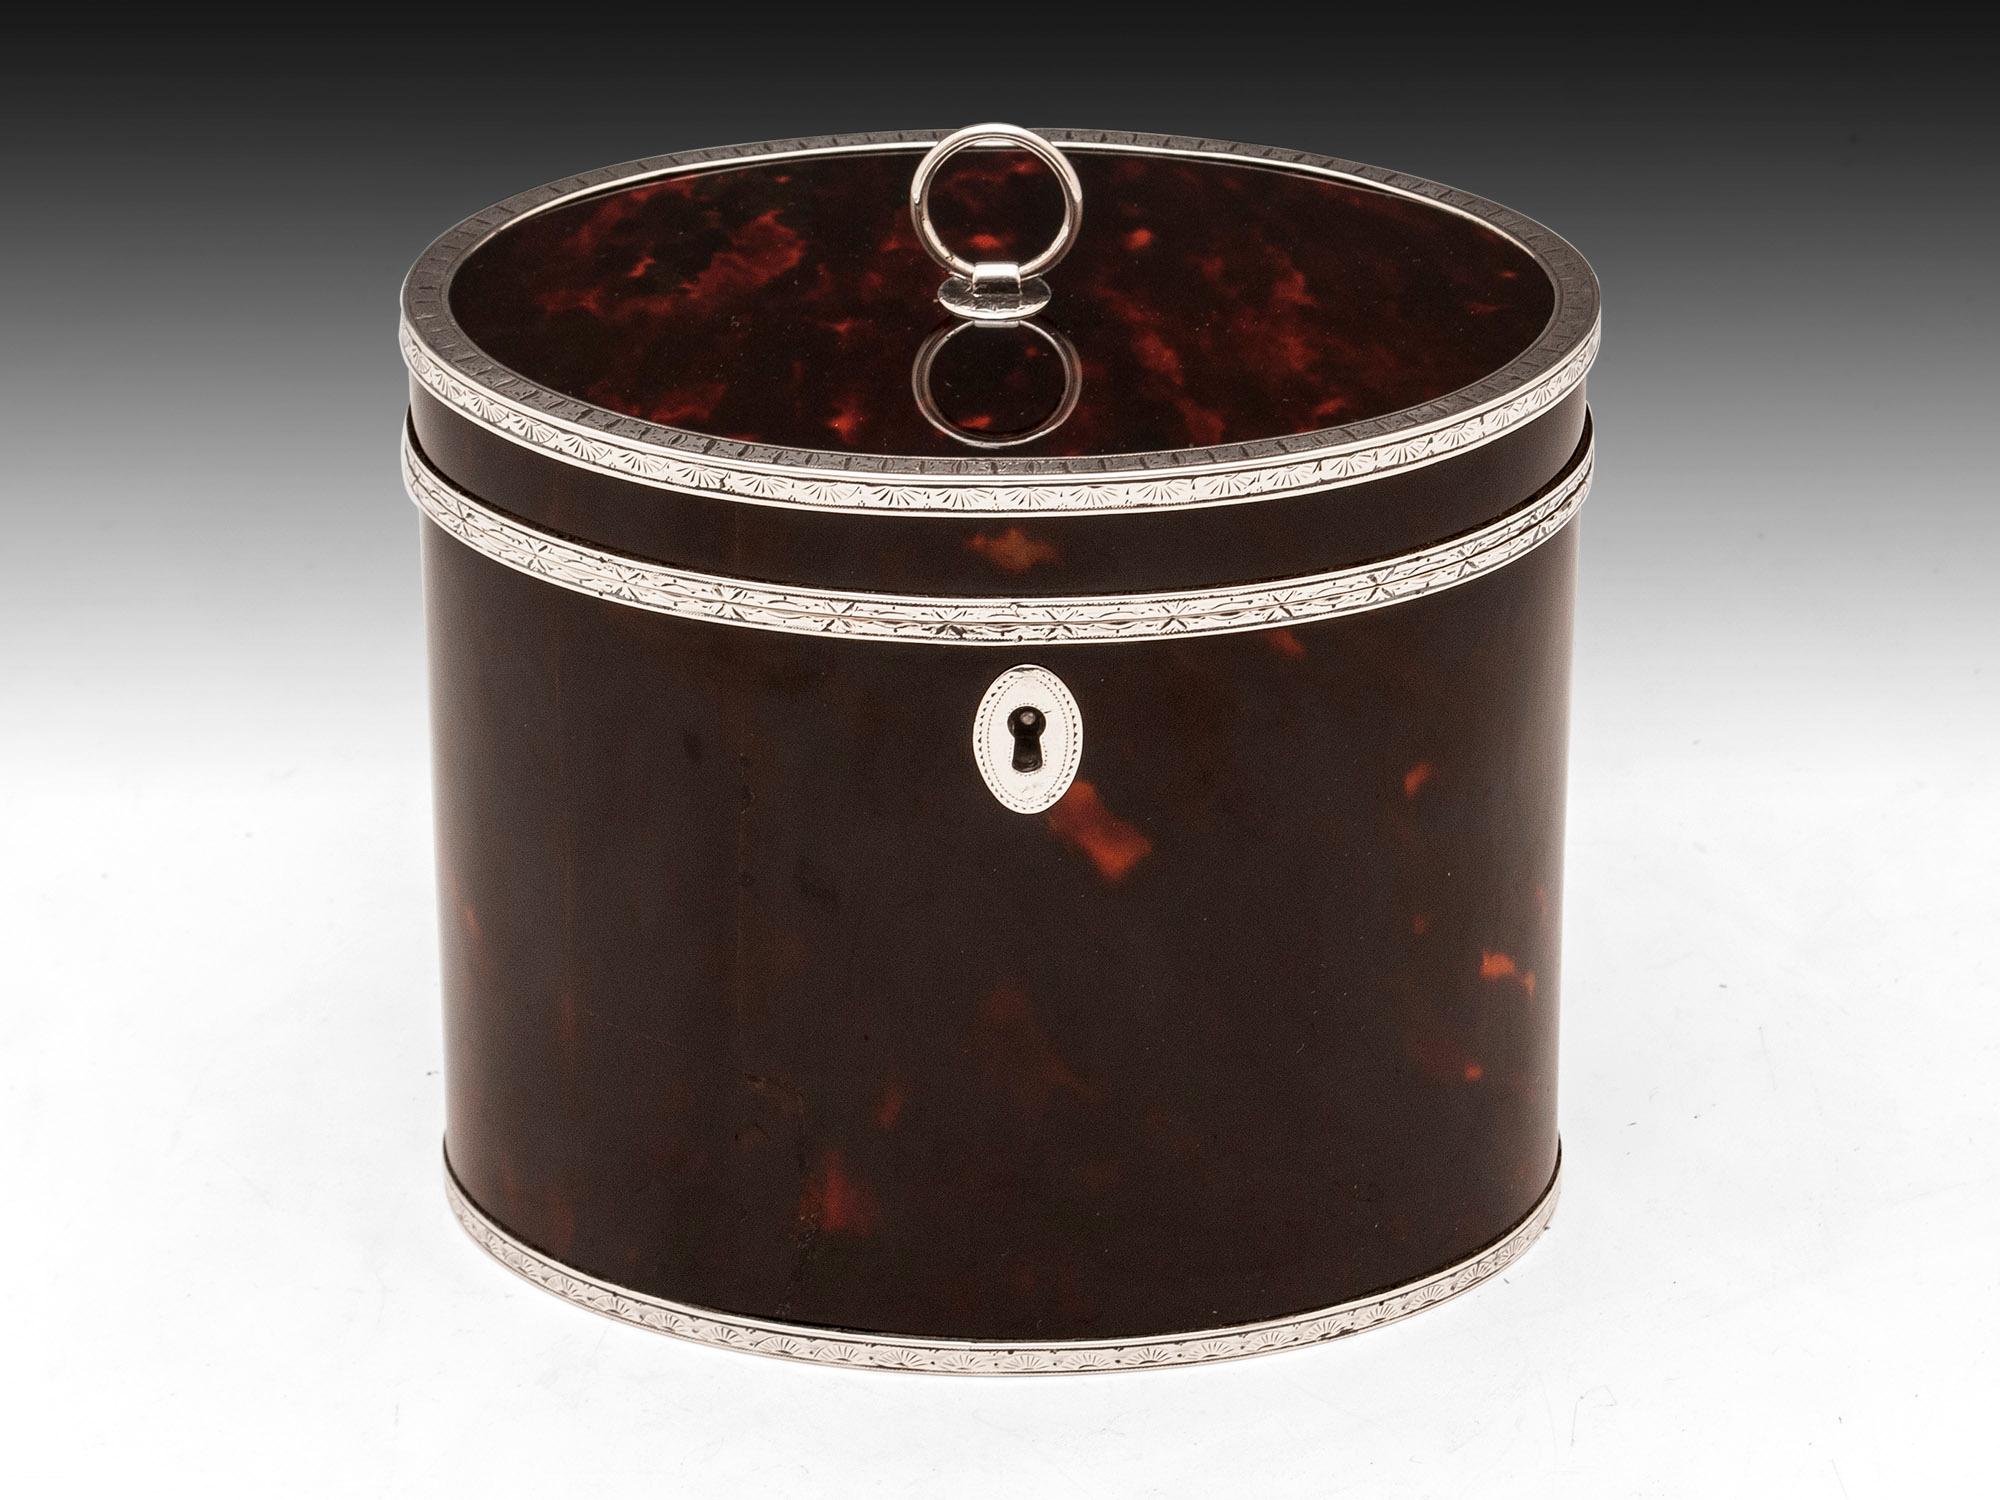 Extremely Rare Single Piece Veneer Tea Caddy

From our Tea Caddy collection, we are delighted to offer this extremely rare red Tortoiseshell & Silver Tea Caddy. The Tea Caddy of oval form with Silver mounts fully veneered in red Tortoiseshell. The